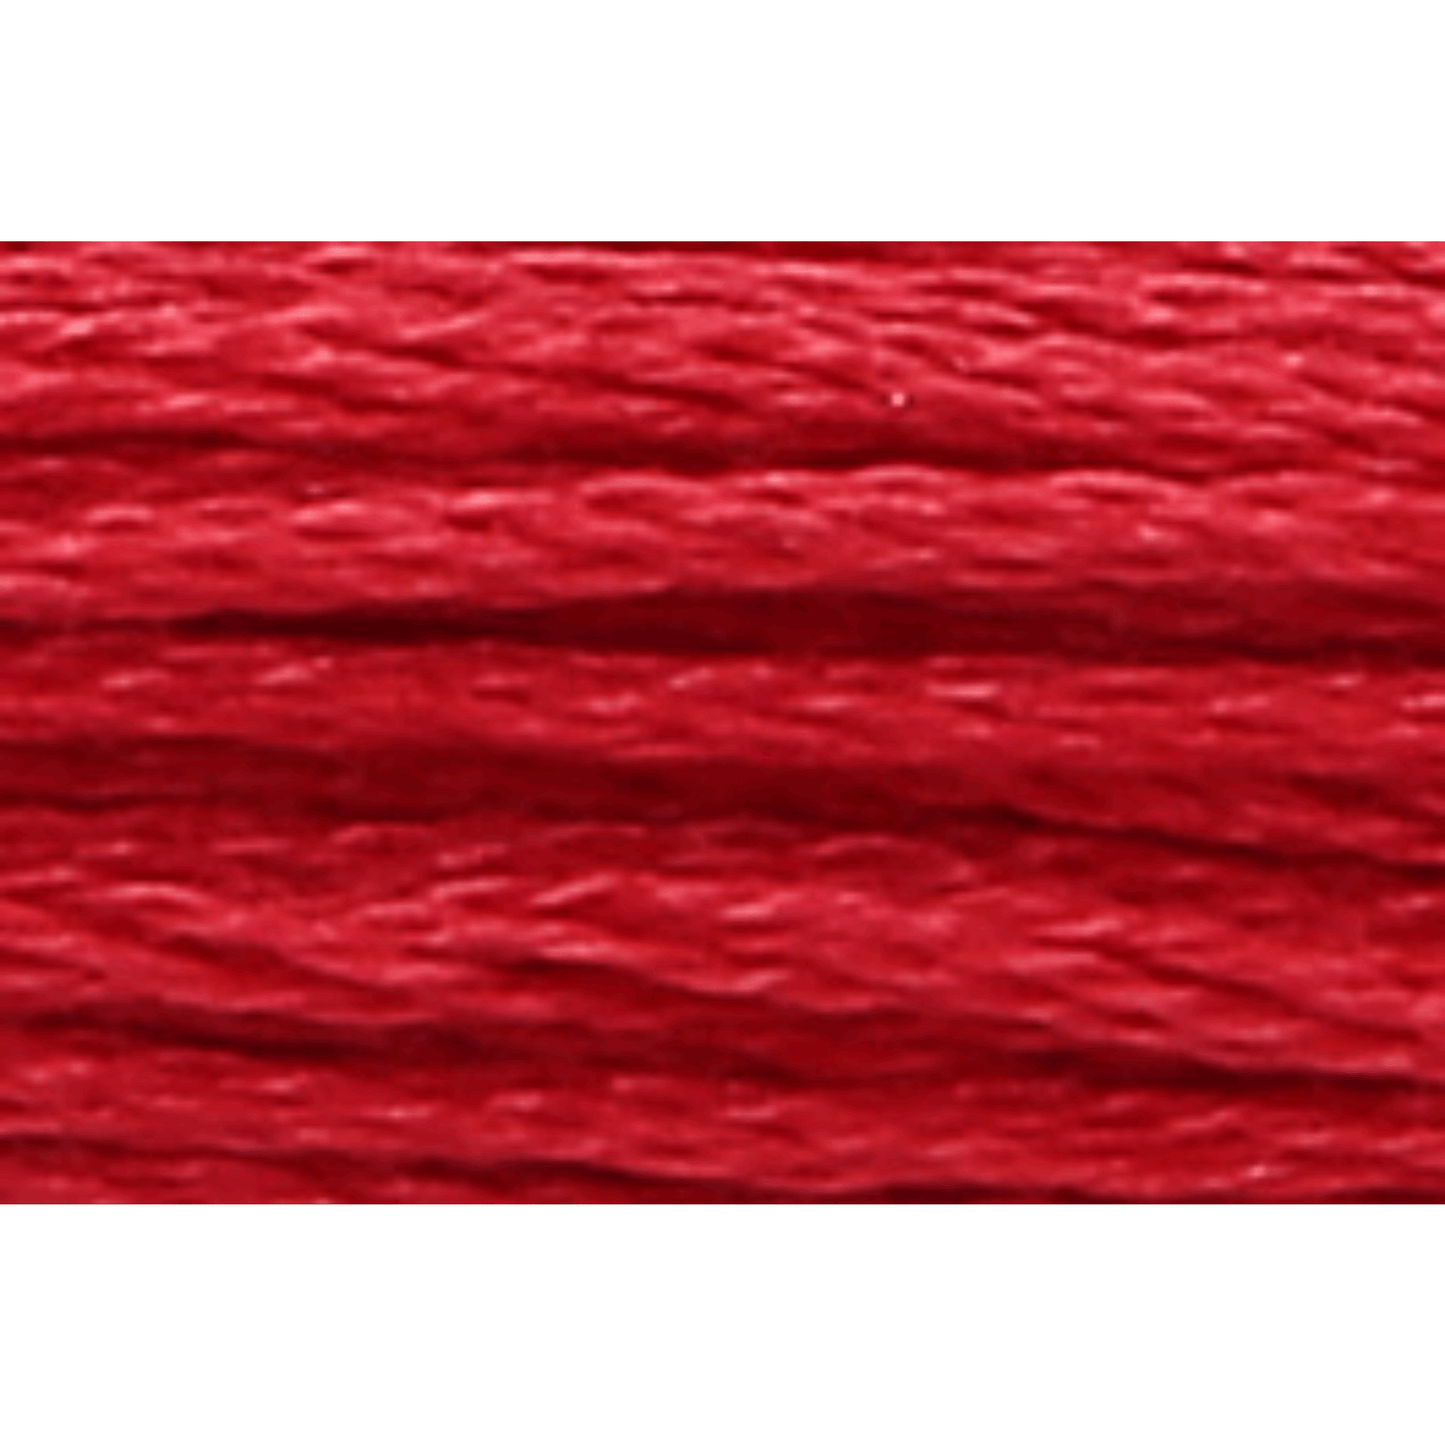 Anchor embroidery thread, 2g, colour 19 fire red